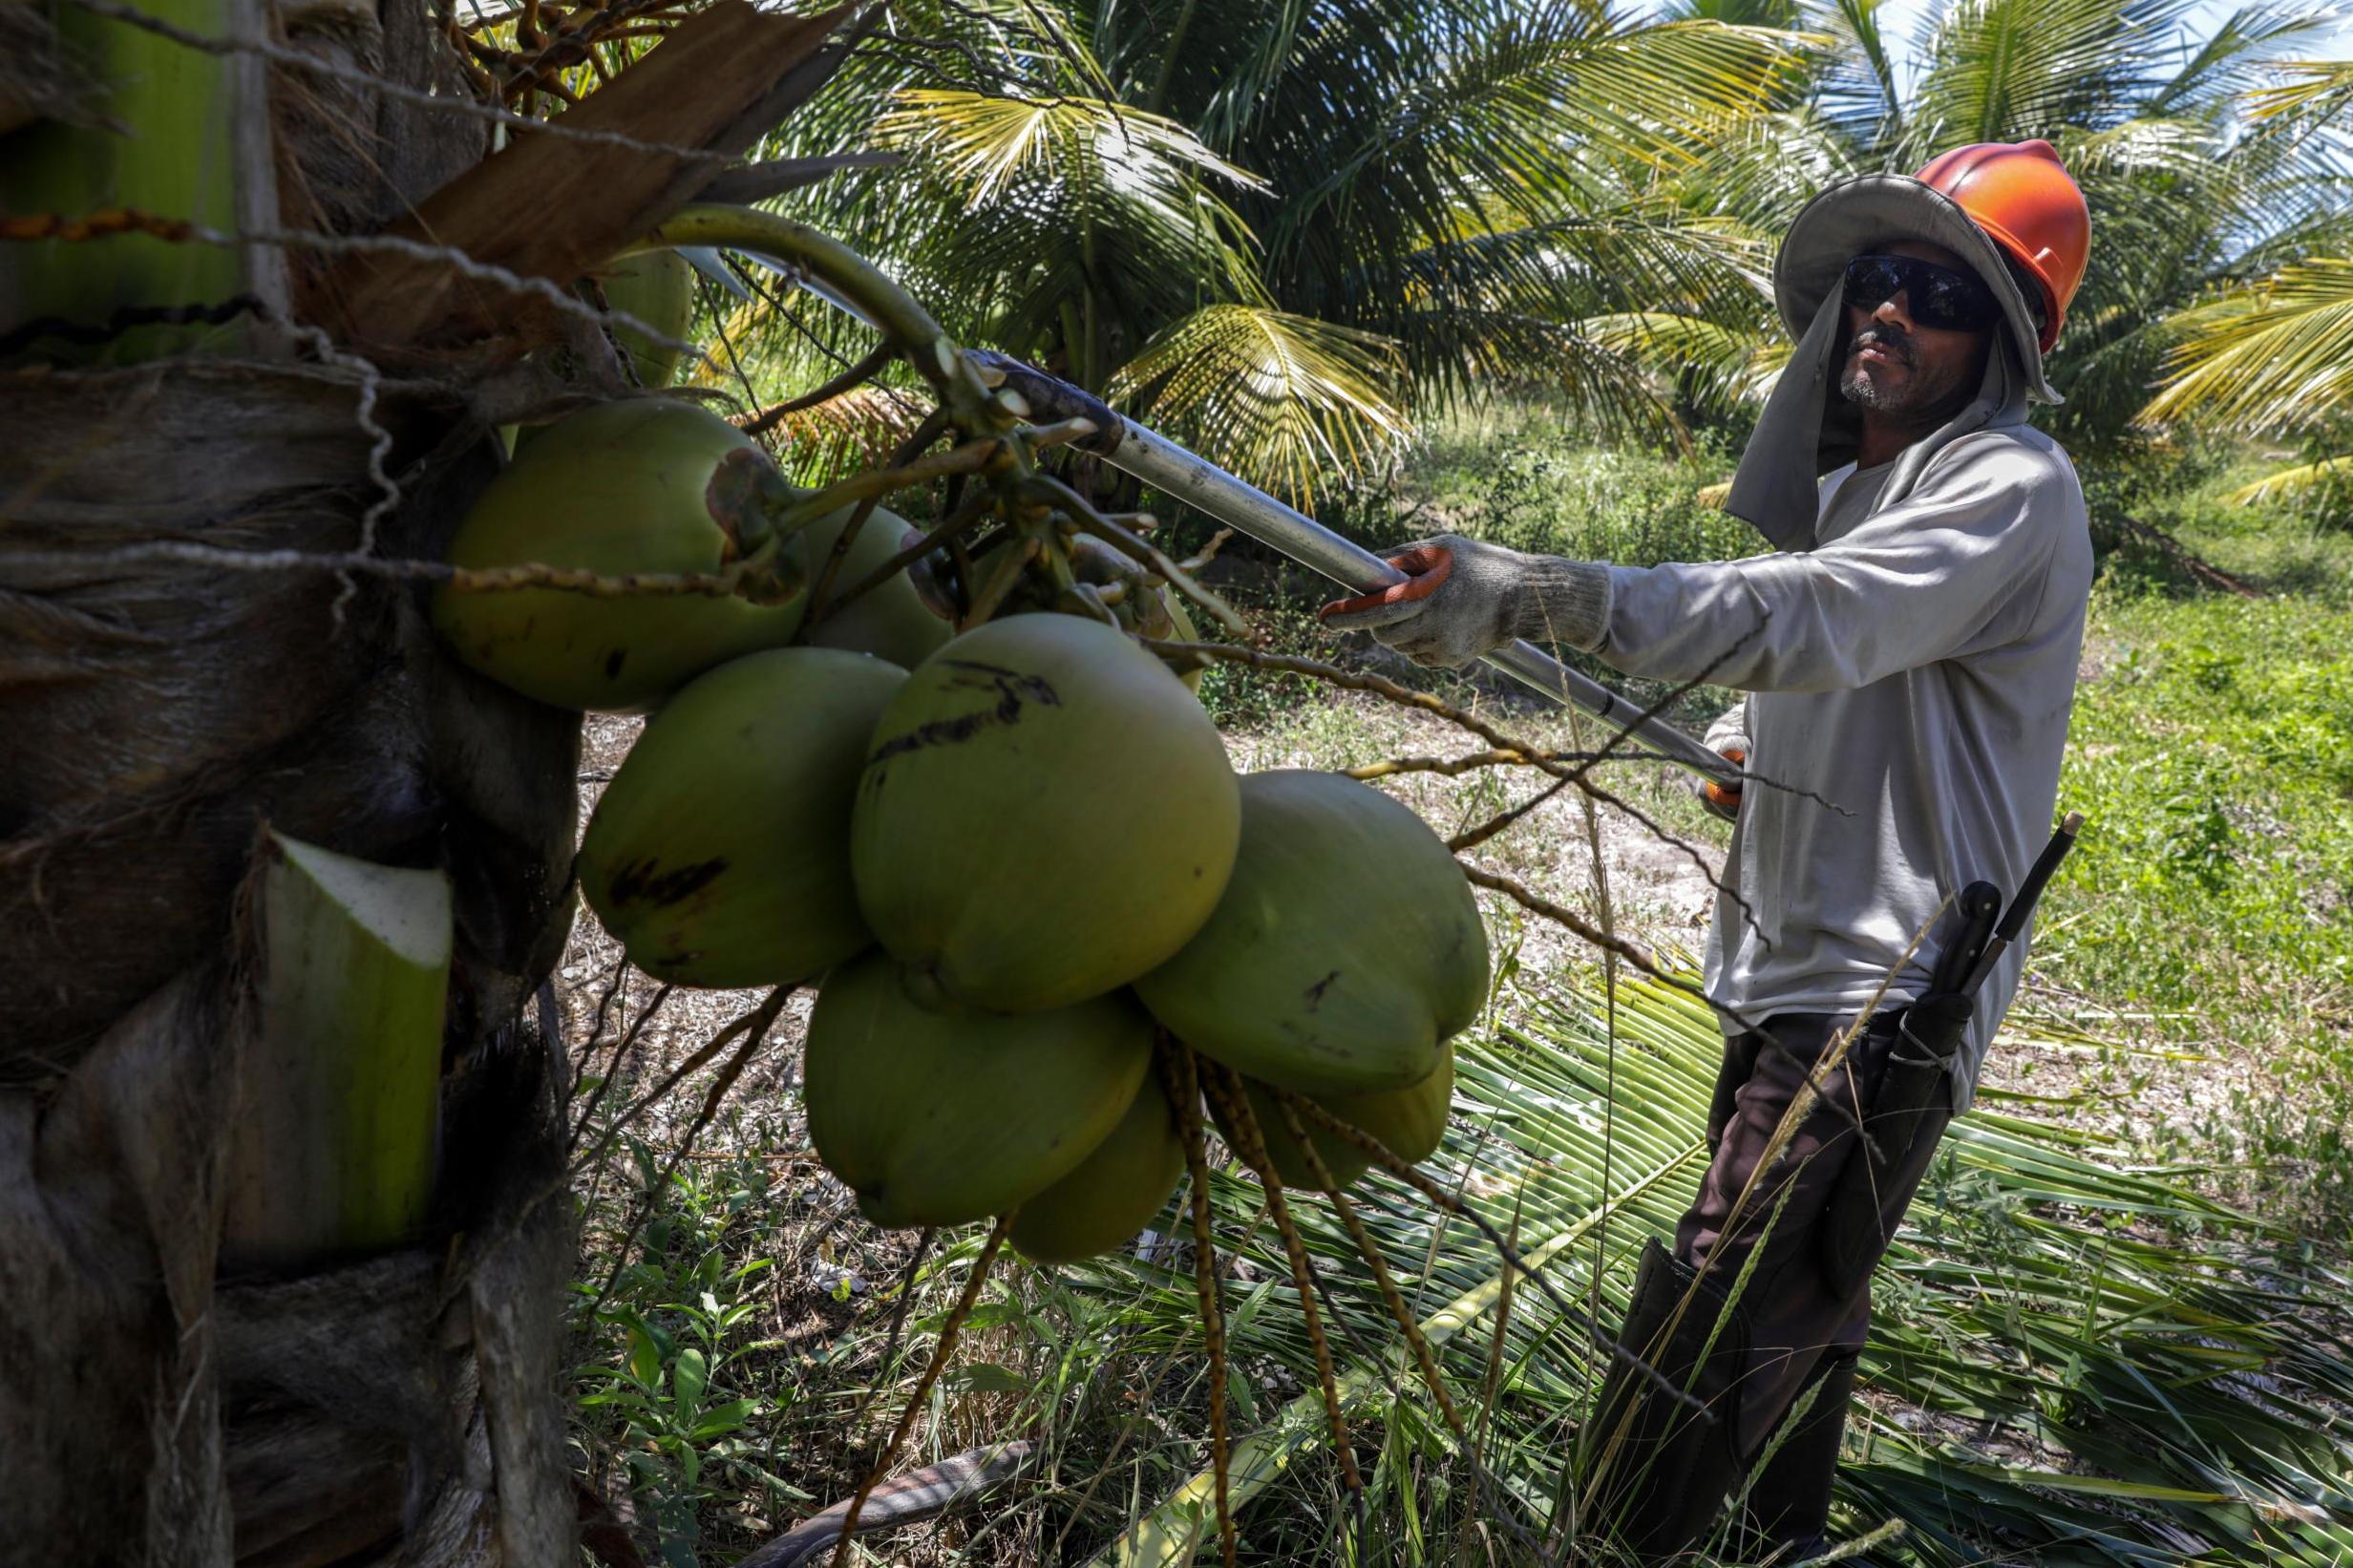 The environmental damage of the coconut trade is not widely known